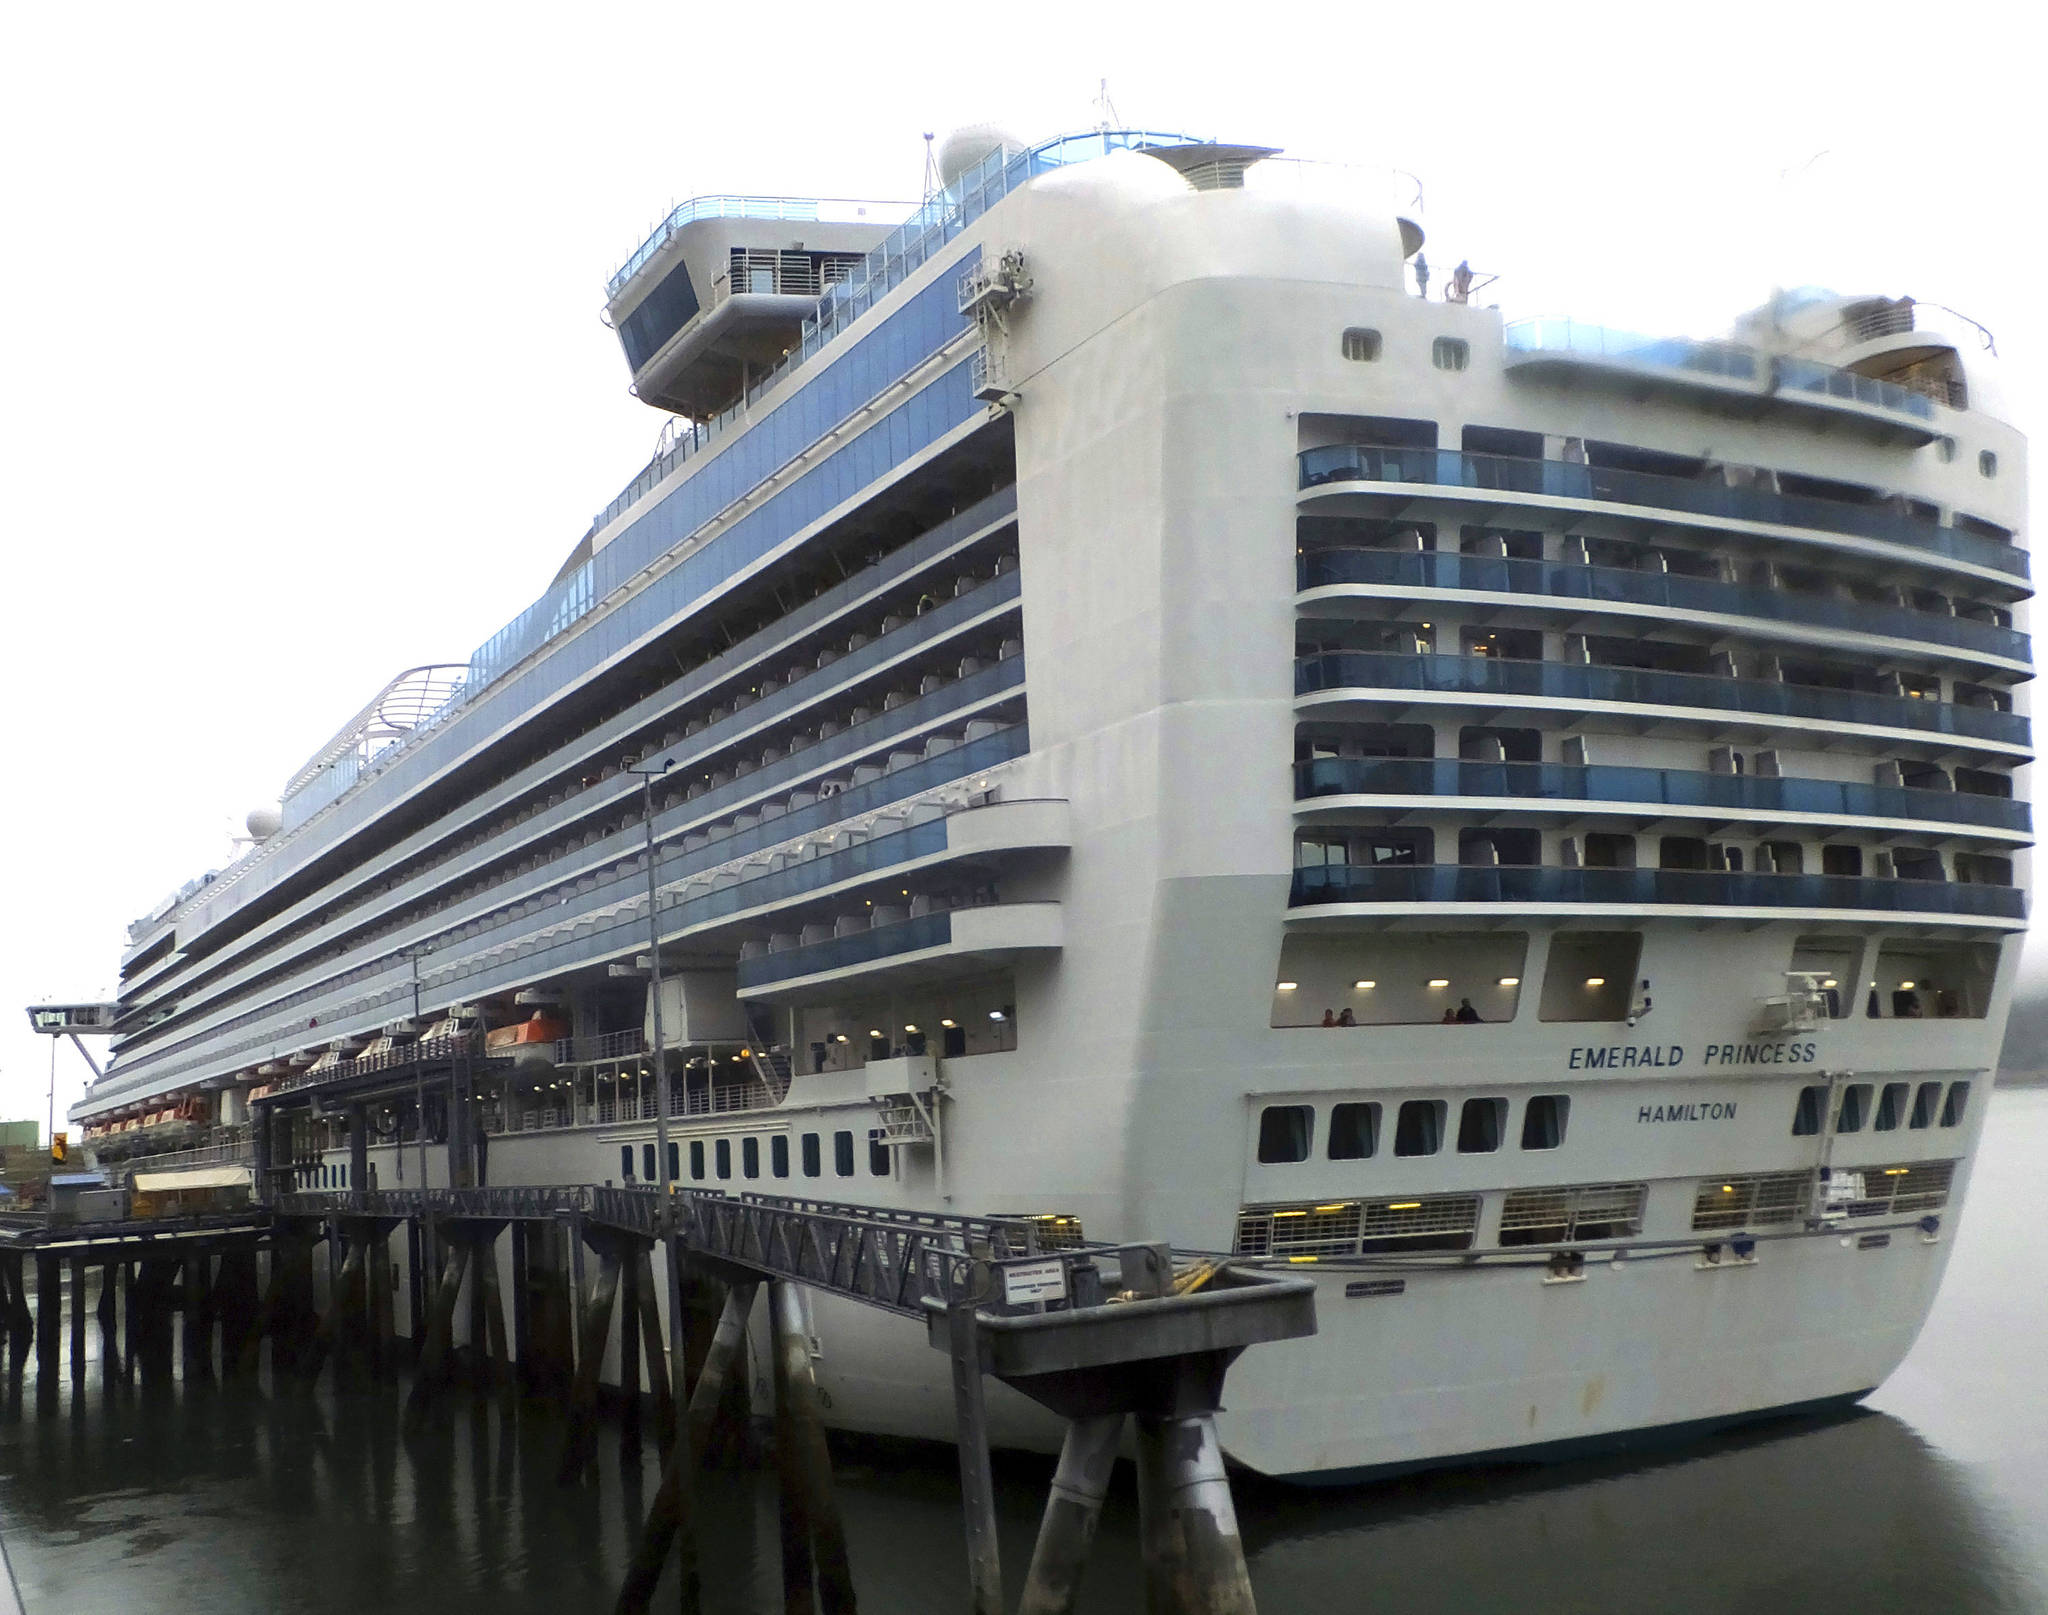 This July 26, 2017 file photo shows the Emerald Princess cruise ship docked in Juneau, Alaska. Kenneth Manzanares, charged with first-degree murder in the death of his wife Kristy while aboard the ship on a cruise to Alaska, pleaded not guilty in federal court in Juneau Wednesday, Aug. 23, 2017. Kristy Manzanares was found dead in a cabin last month on the ship while it was in U.S. waters off Alaska. (AP Photo/Becky Bohrer, File)